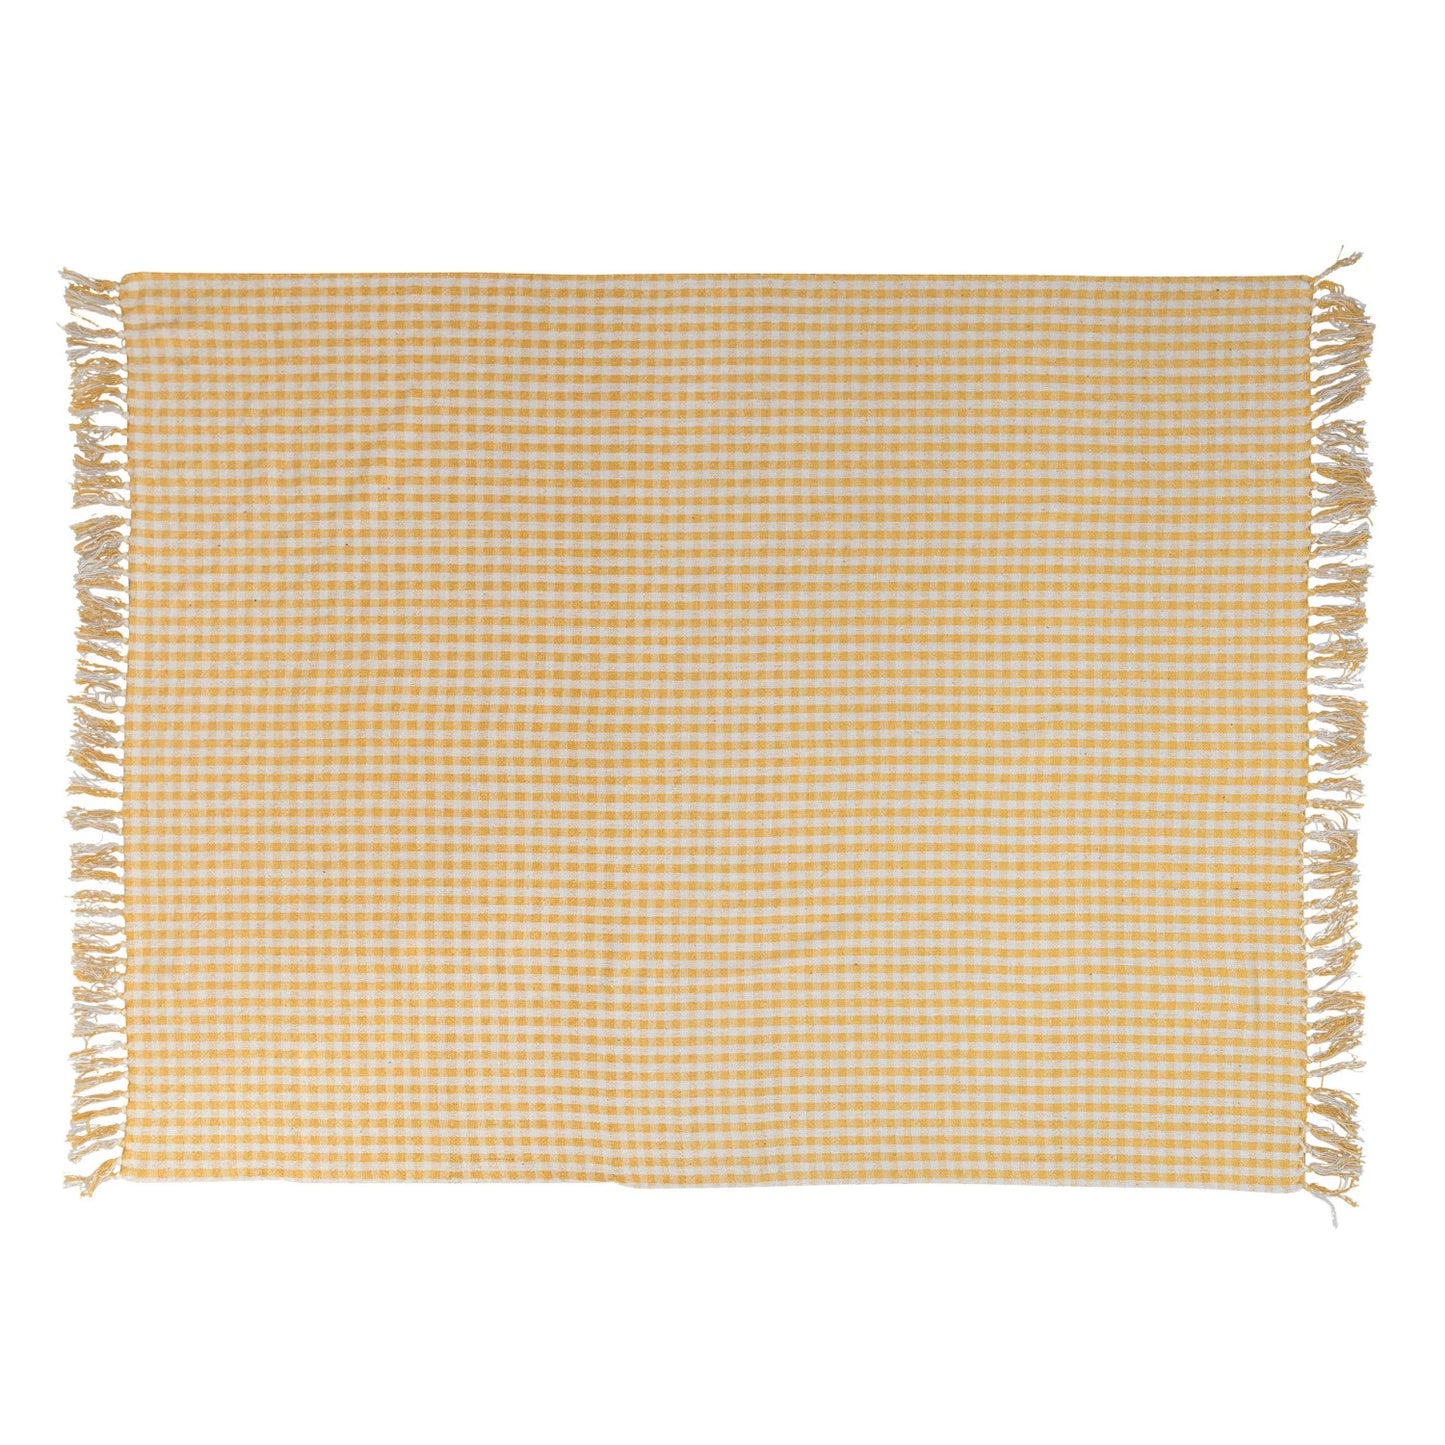 Woven Recycled Cotton Blend Throw w/ Fringe Gingham